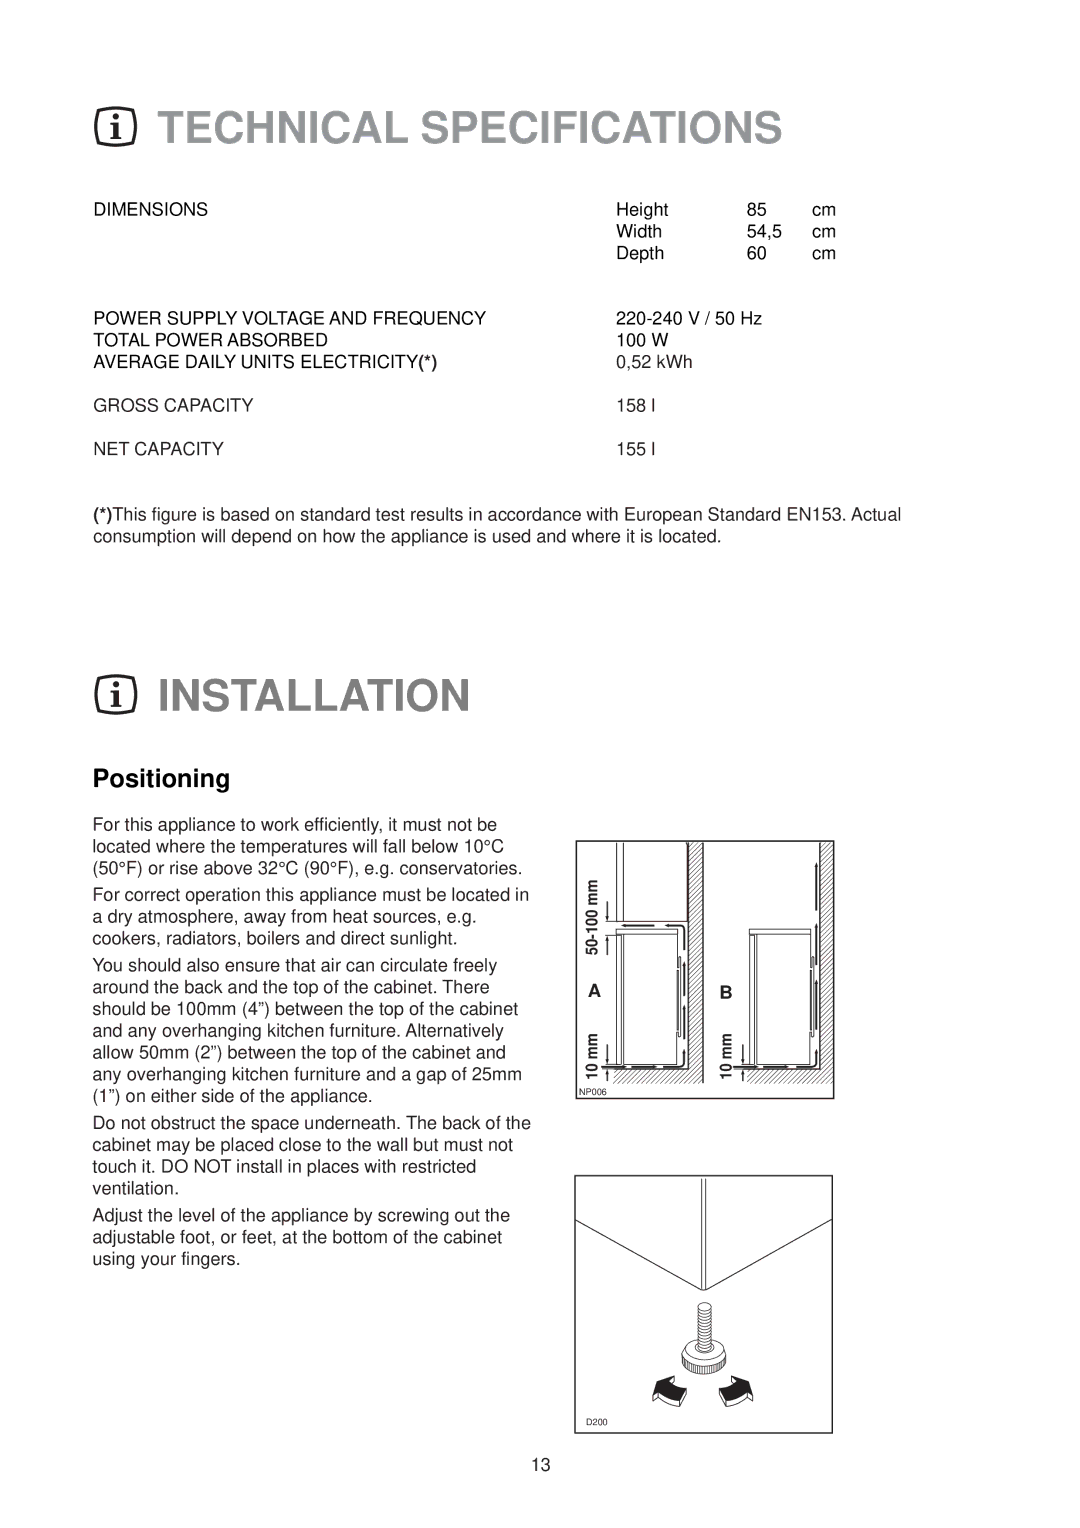 Zanussi ZL 56 SA, ZL 56 W manual Technical Specifications, Installation, Positioning 